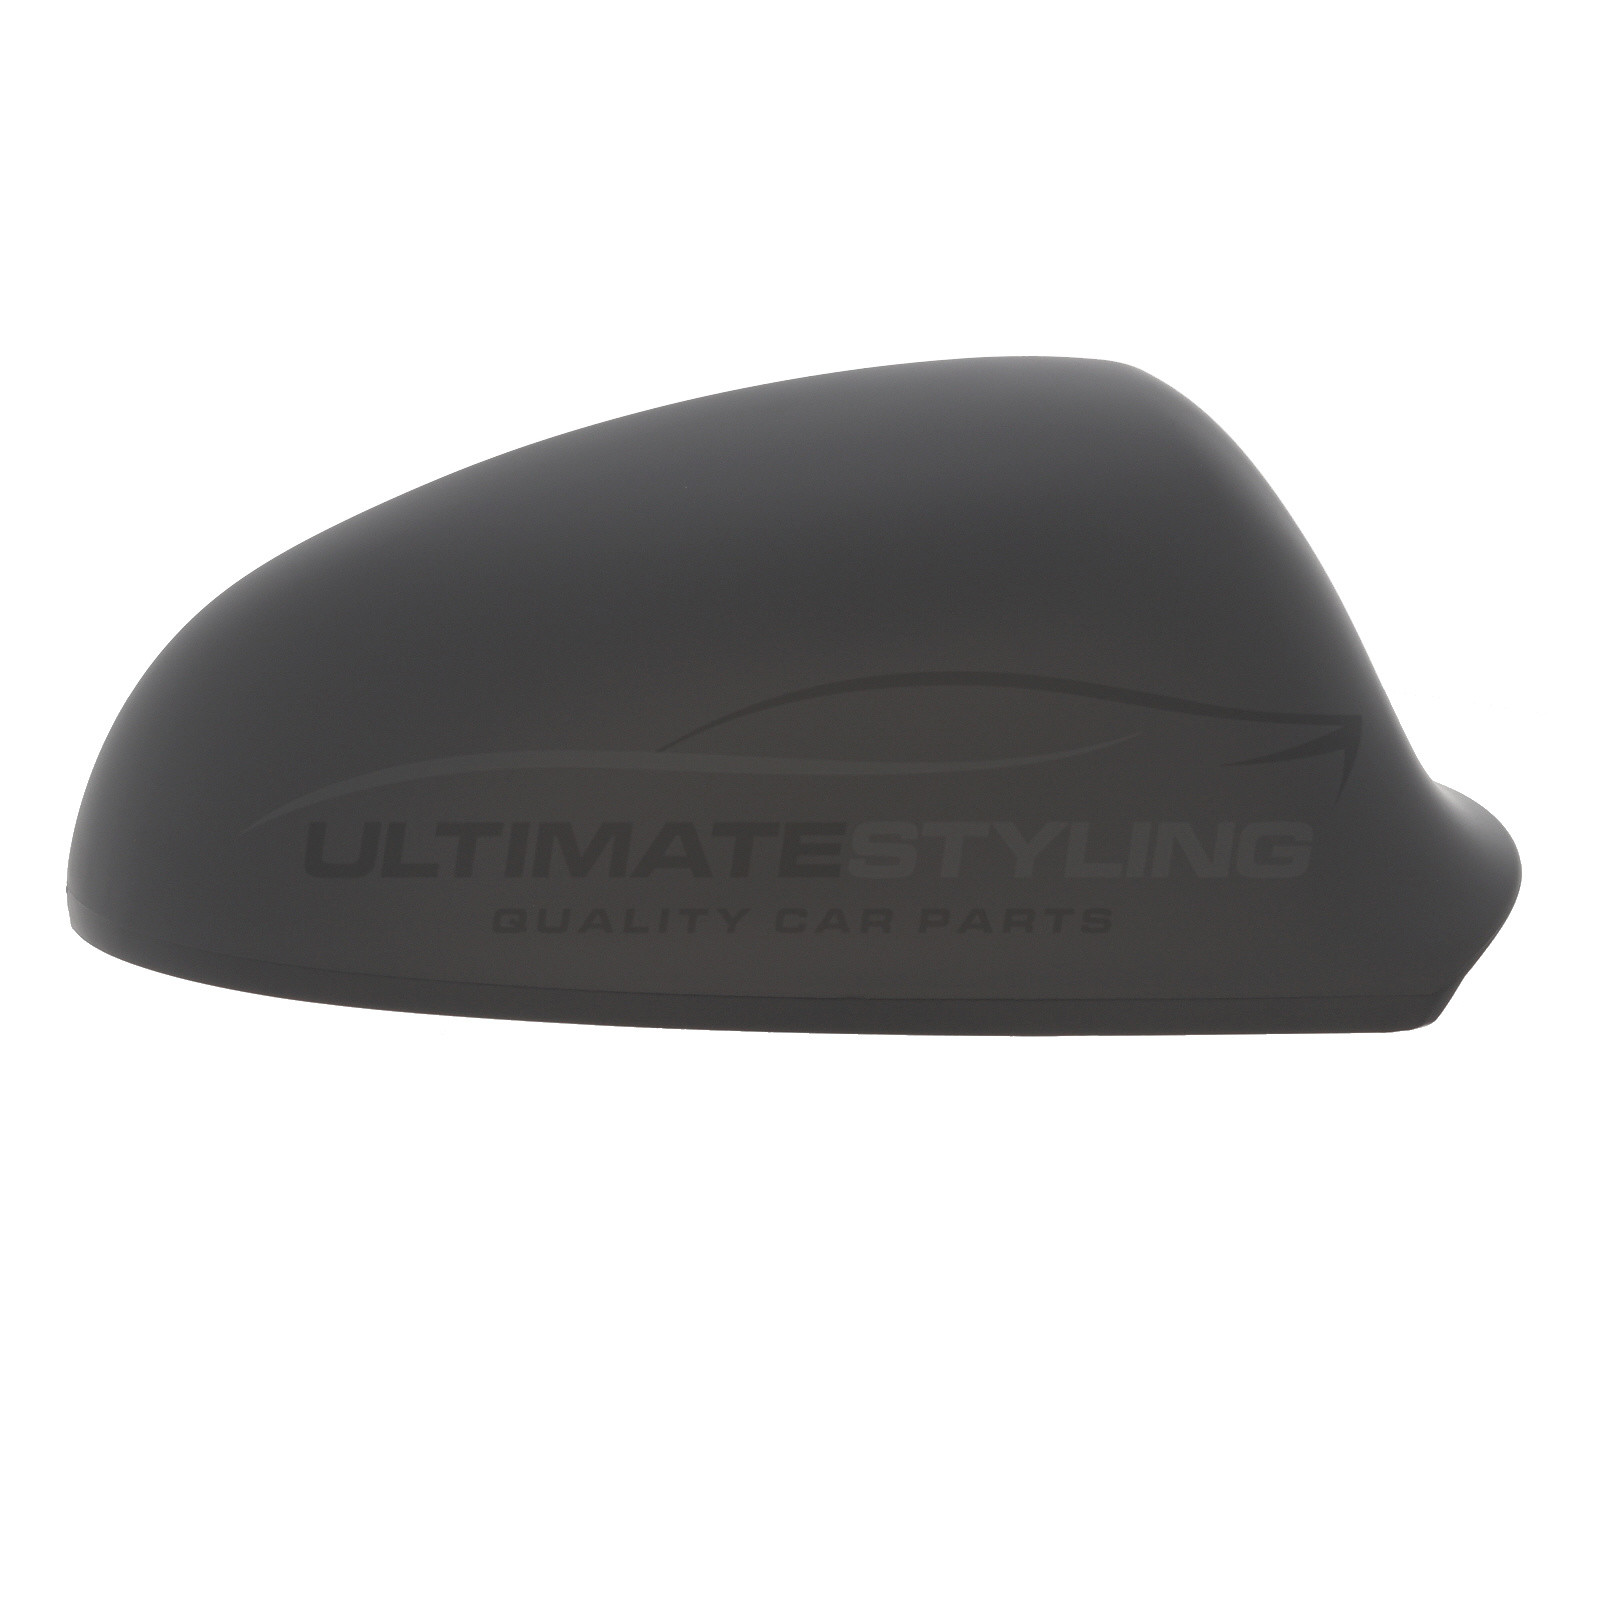 Ford S-MAX 2015->, Vauxhall Astra 2009-2016, Vauxhall Cascada 2012-2018 Wing Mirror Cover Cap Casing Primed Drivers Side (RH)